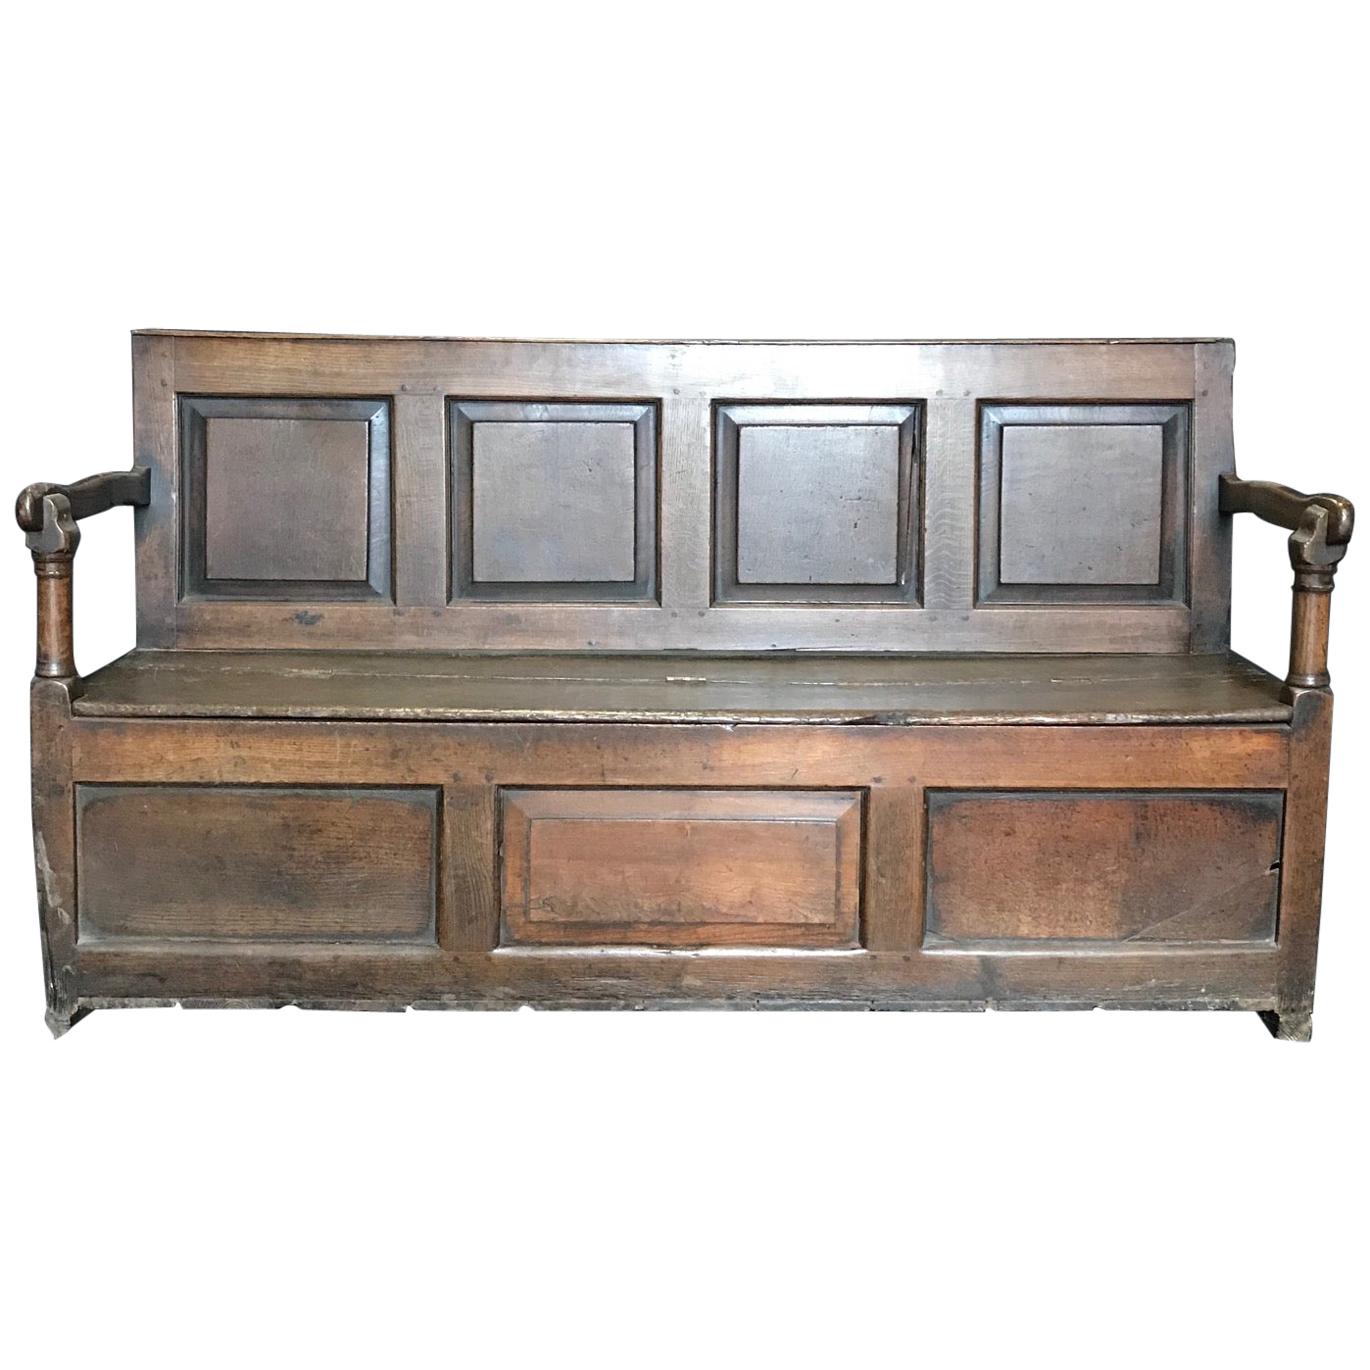 Character Rich Very Early British Mudroom Bench with Storage under Seat